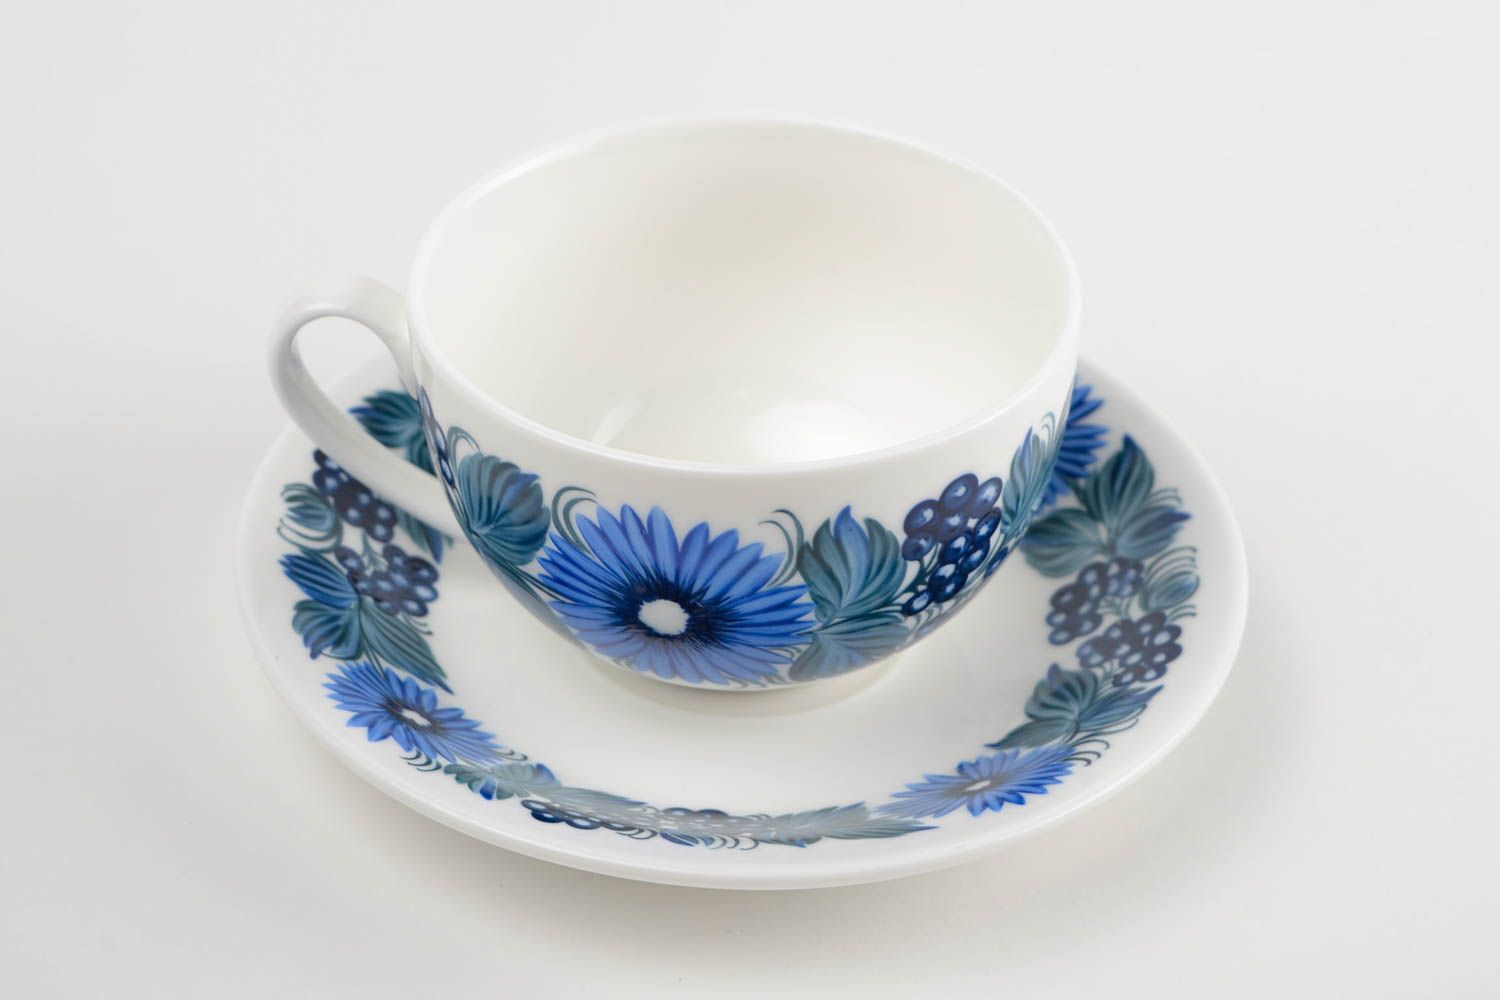 8 oz white and blue teacup in classic shape with handle and saucer photo 5